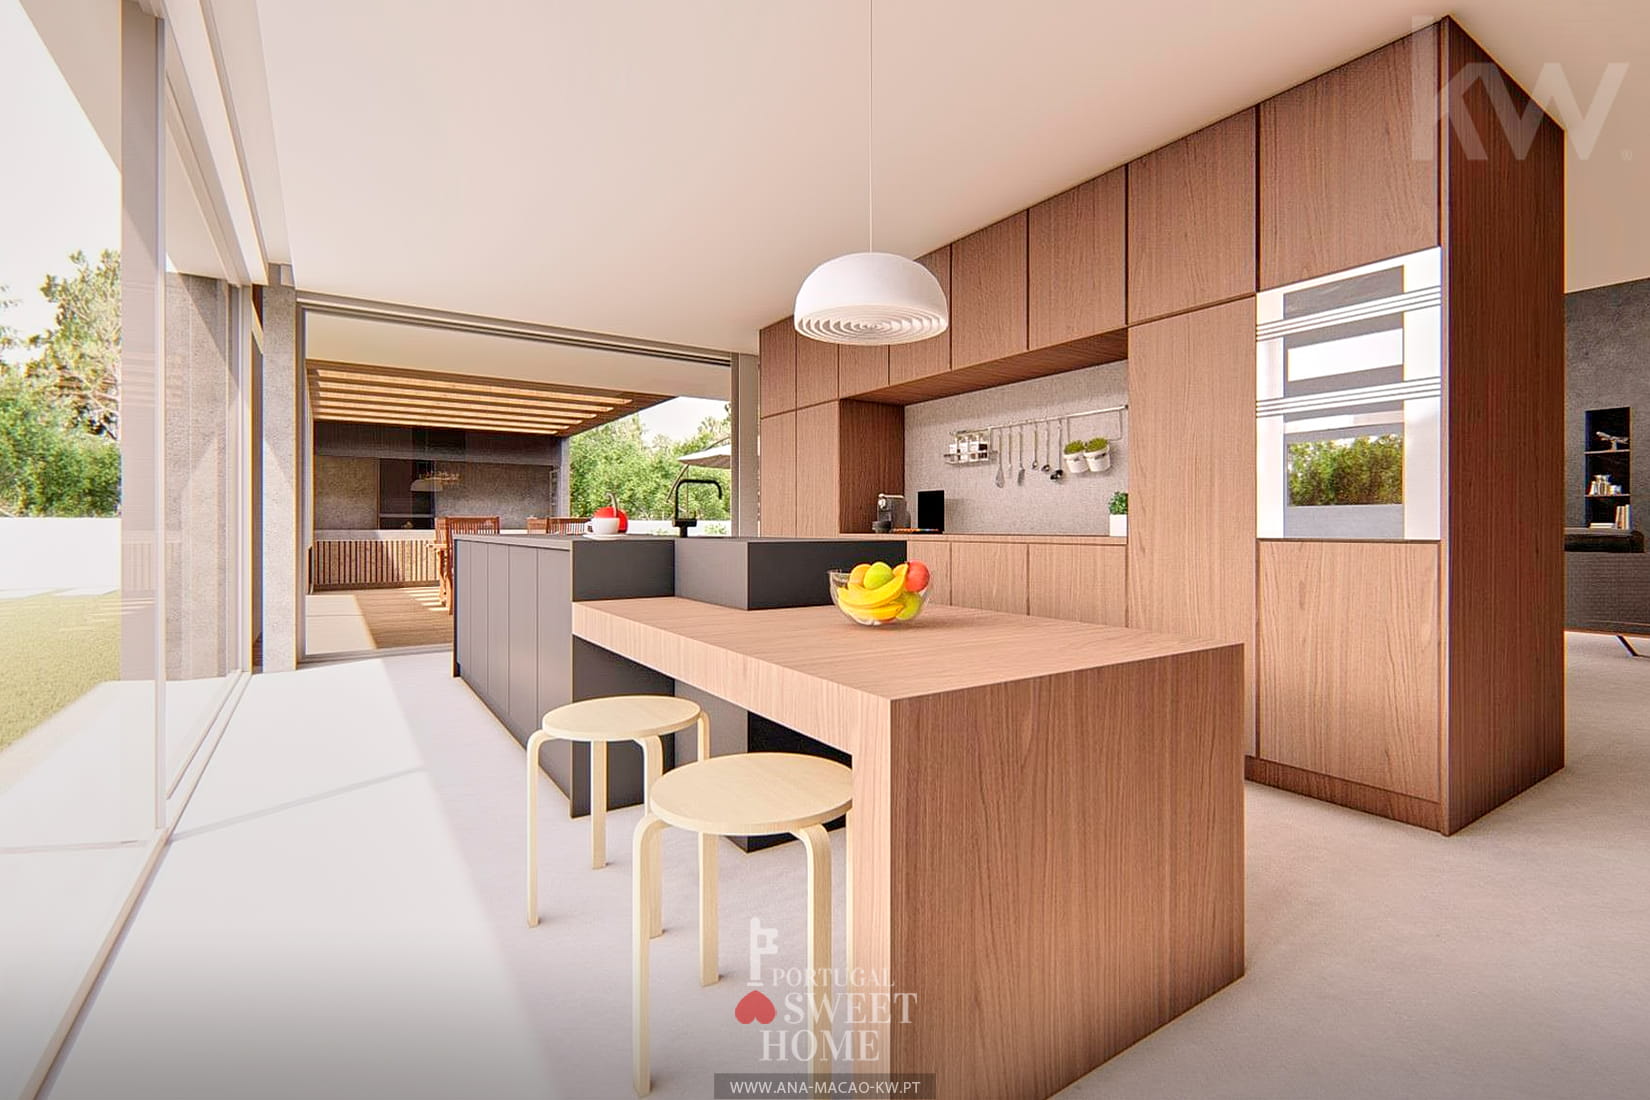 Fully equipped kitchen with island